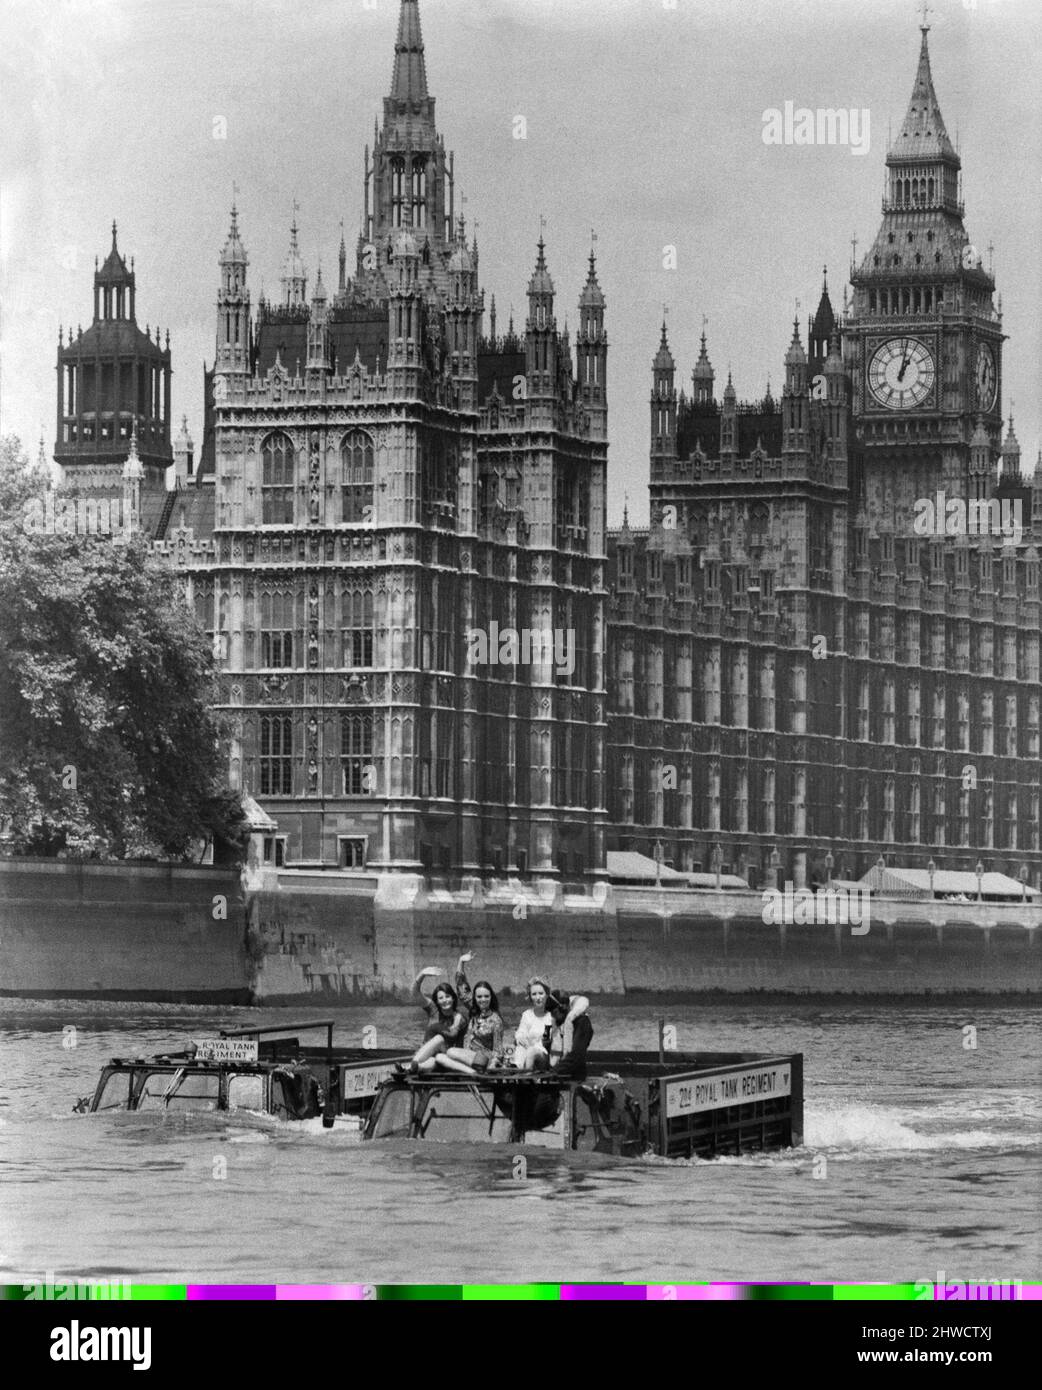 Army Vehicles. Amphibious.  Two Army trucks transport three waving women through the water of the river Thames.   June 1970 P035494 Stock Photo